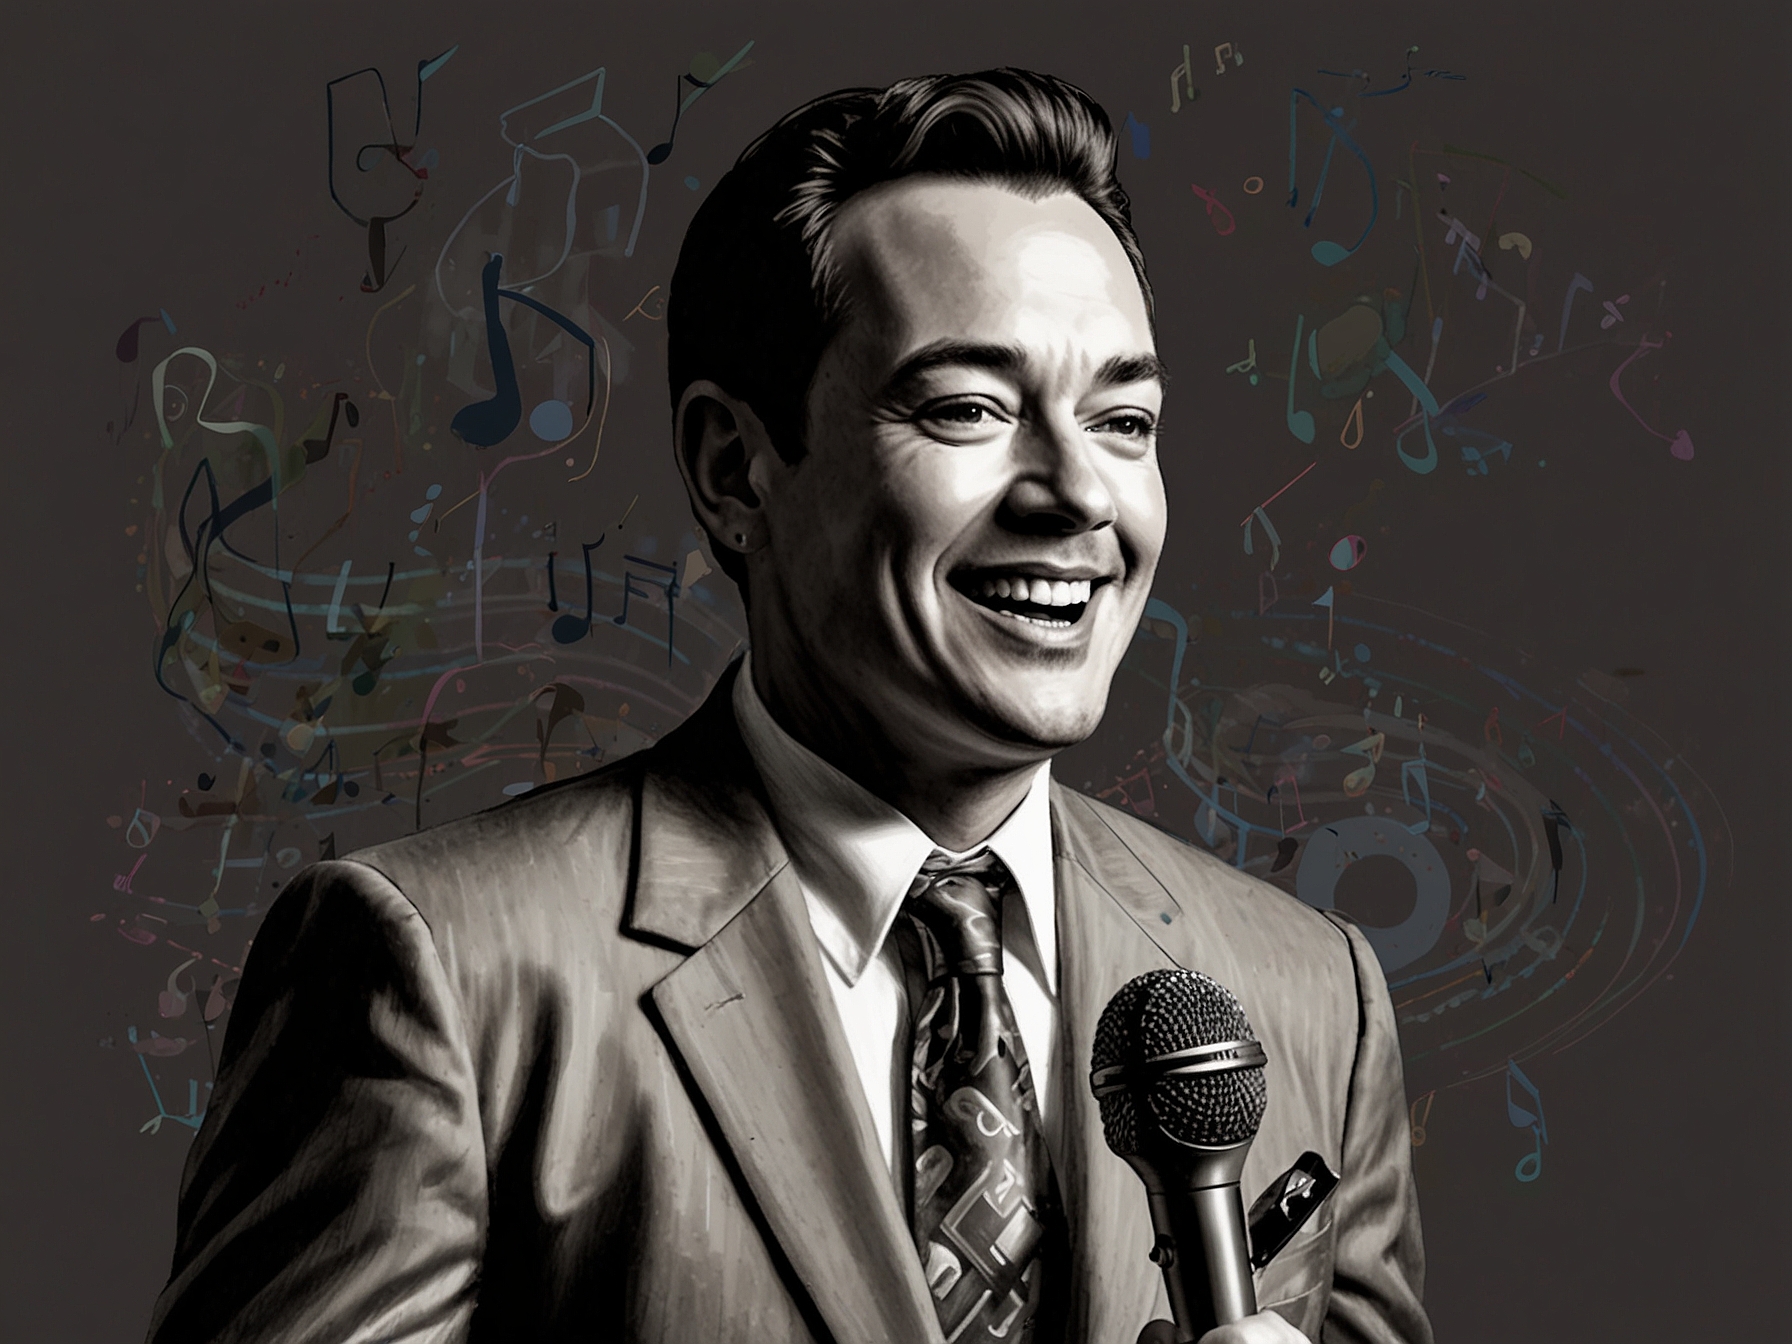 Craig Revel Horwood poses with a microphone and musical notes, symbolizing his upcoming debut solo album and new venture into the music industry.